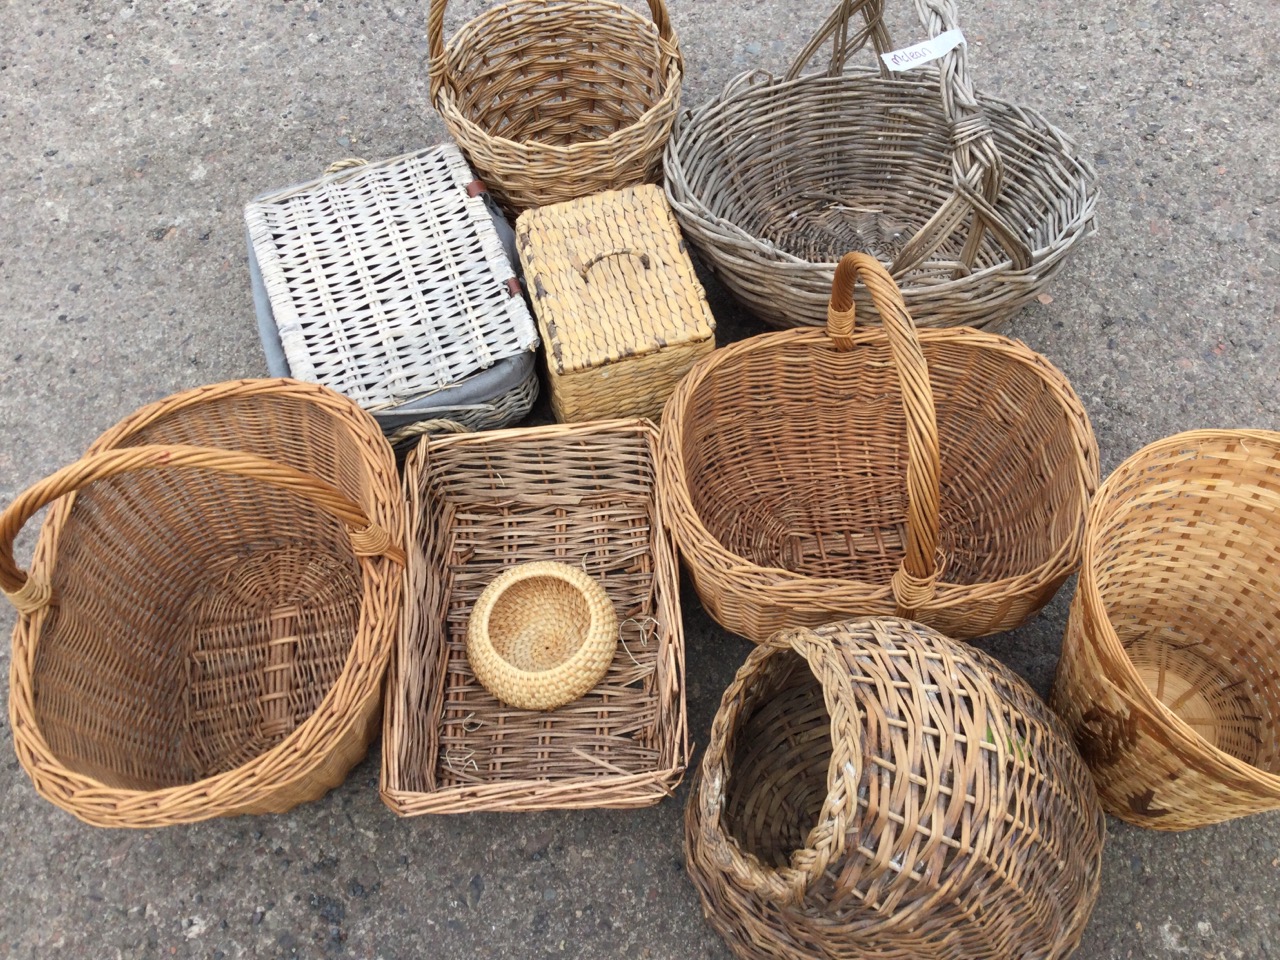 Ten miscellaneous baskets - picnic, shopping, sewing, cat, wastepaper, etc. (10) - Image 2 of 3